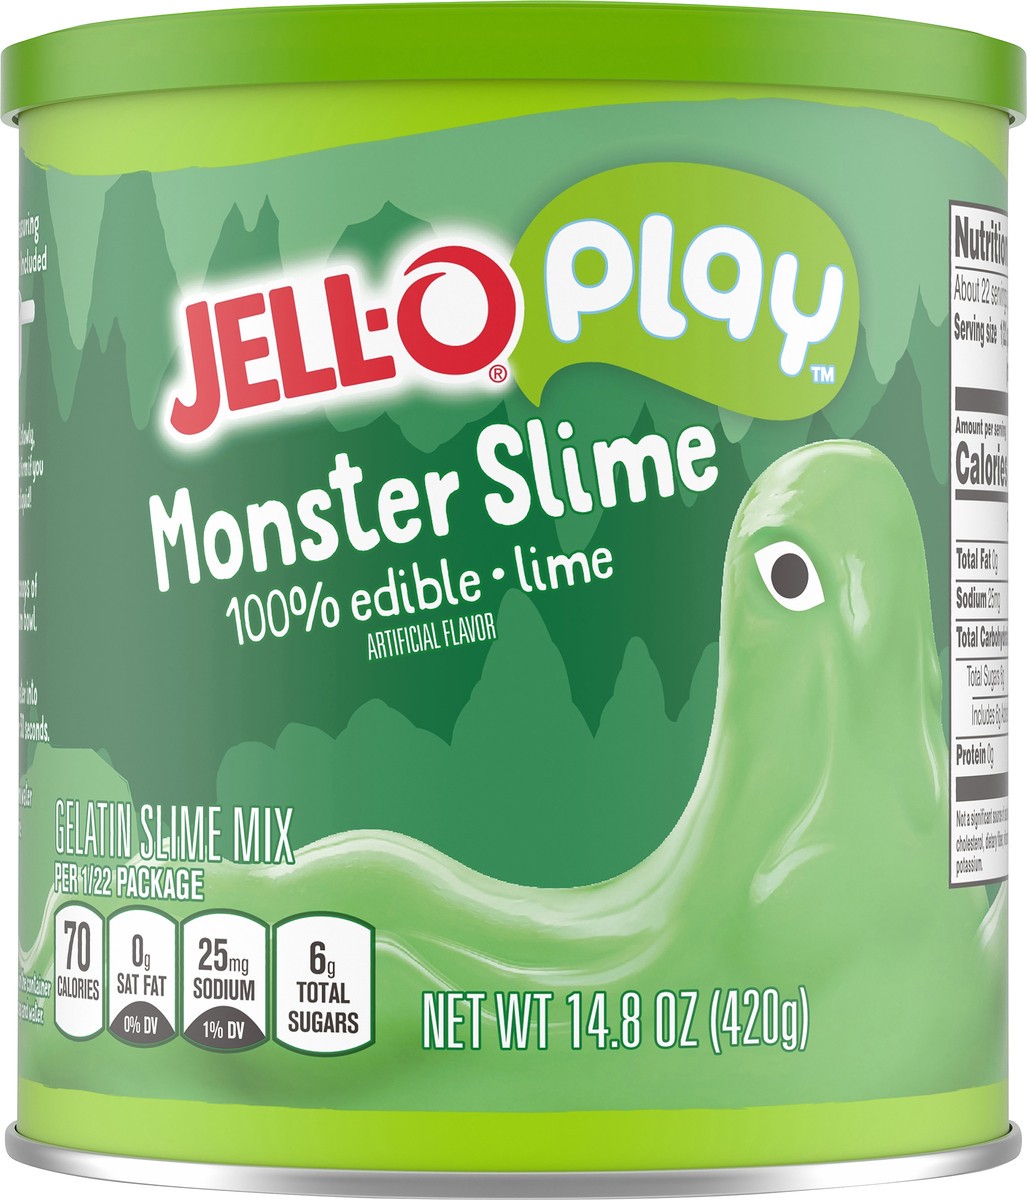 slide 12 of 14, Jell-O Play Monster Slime Kit with 100% Edible Lime Gelatin Mix, 14.8 oz Canister, 14.8 oz